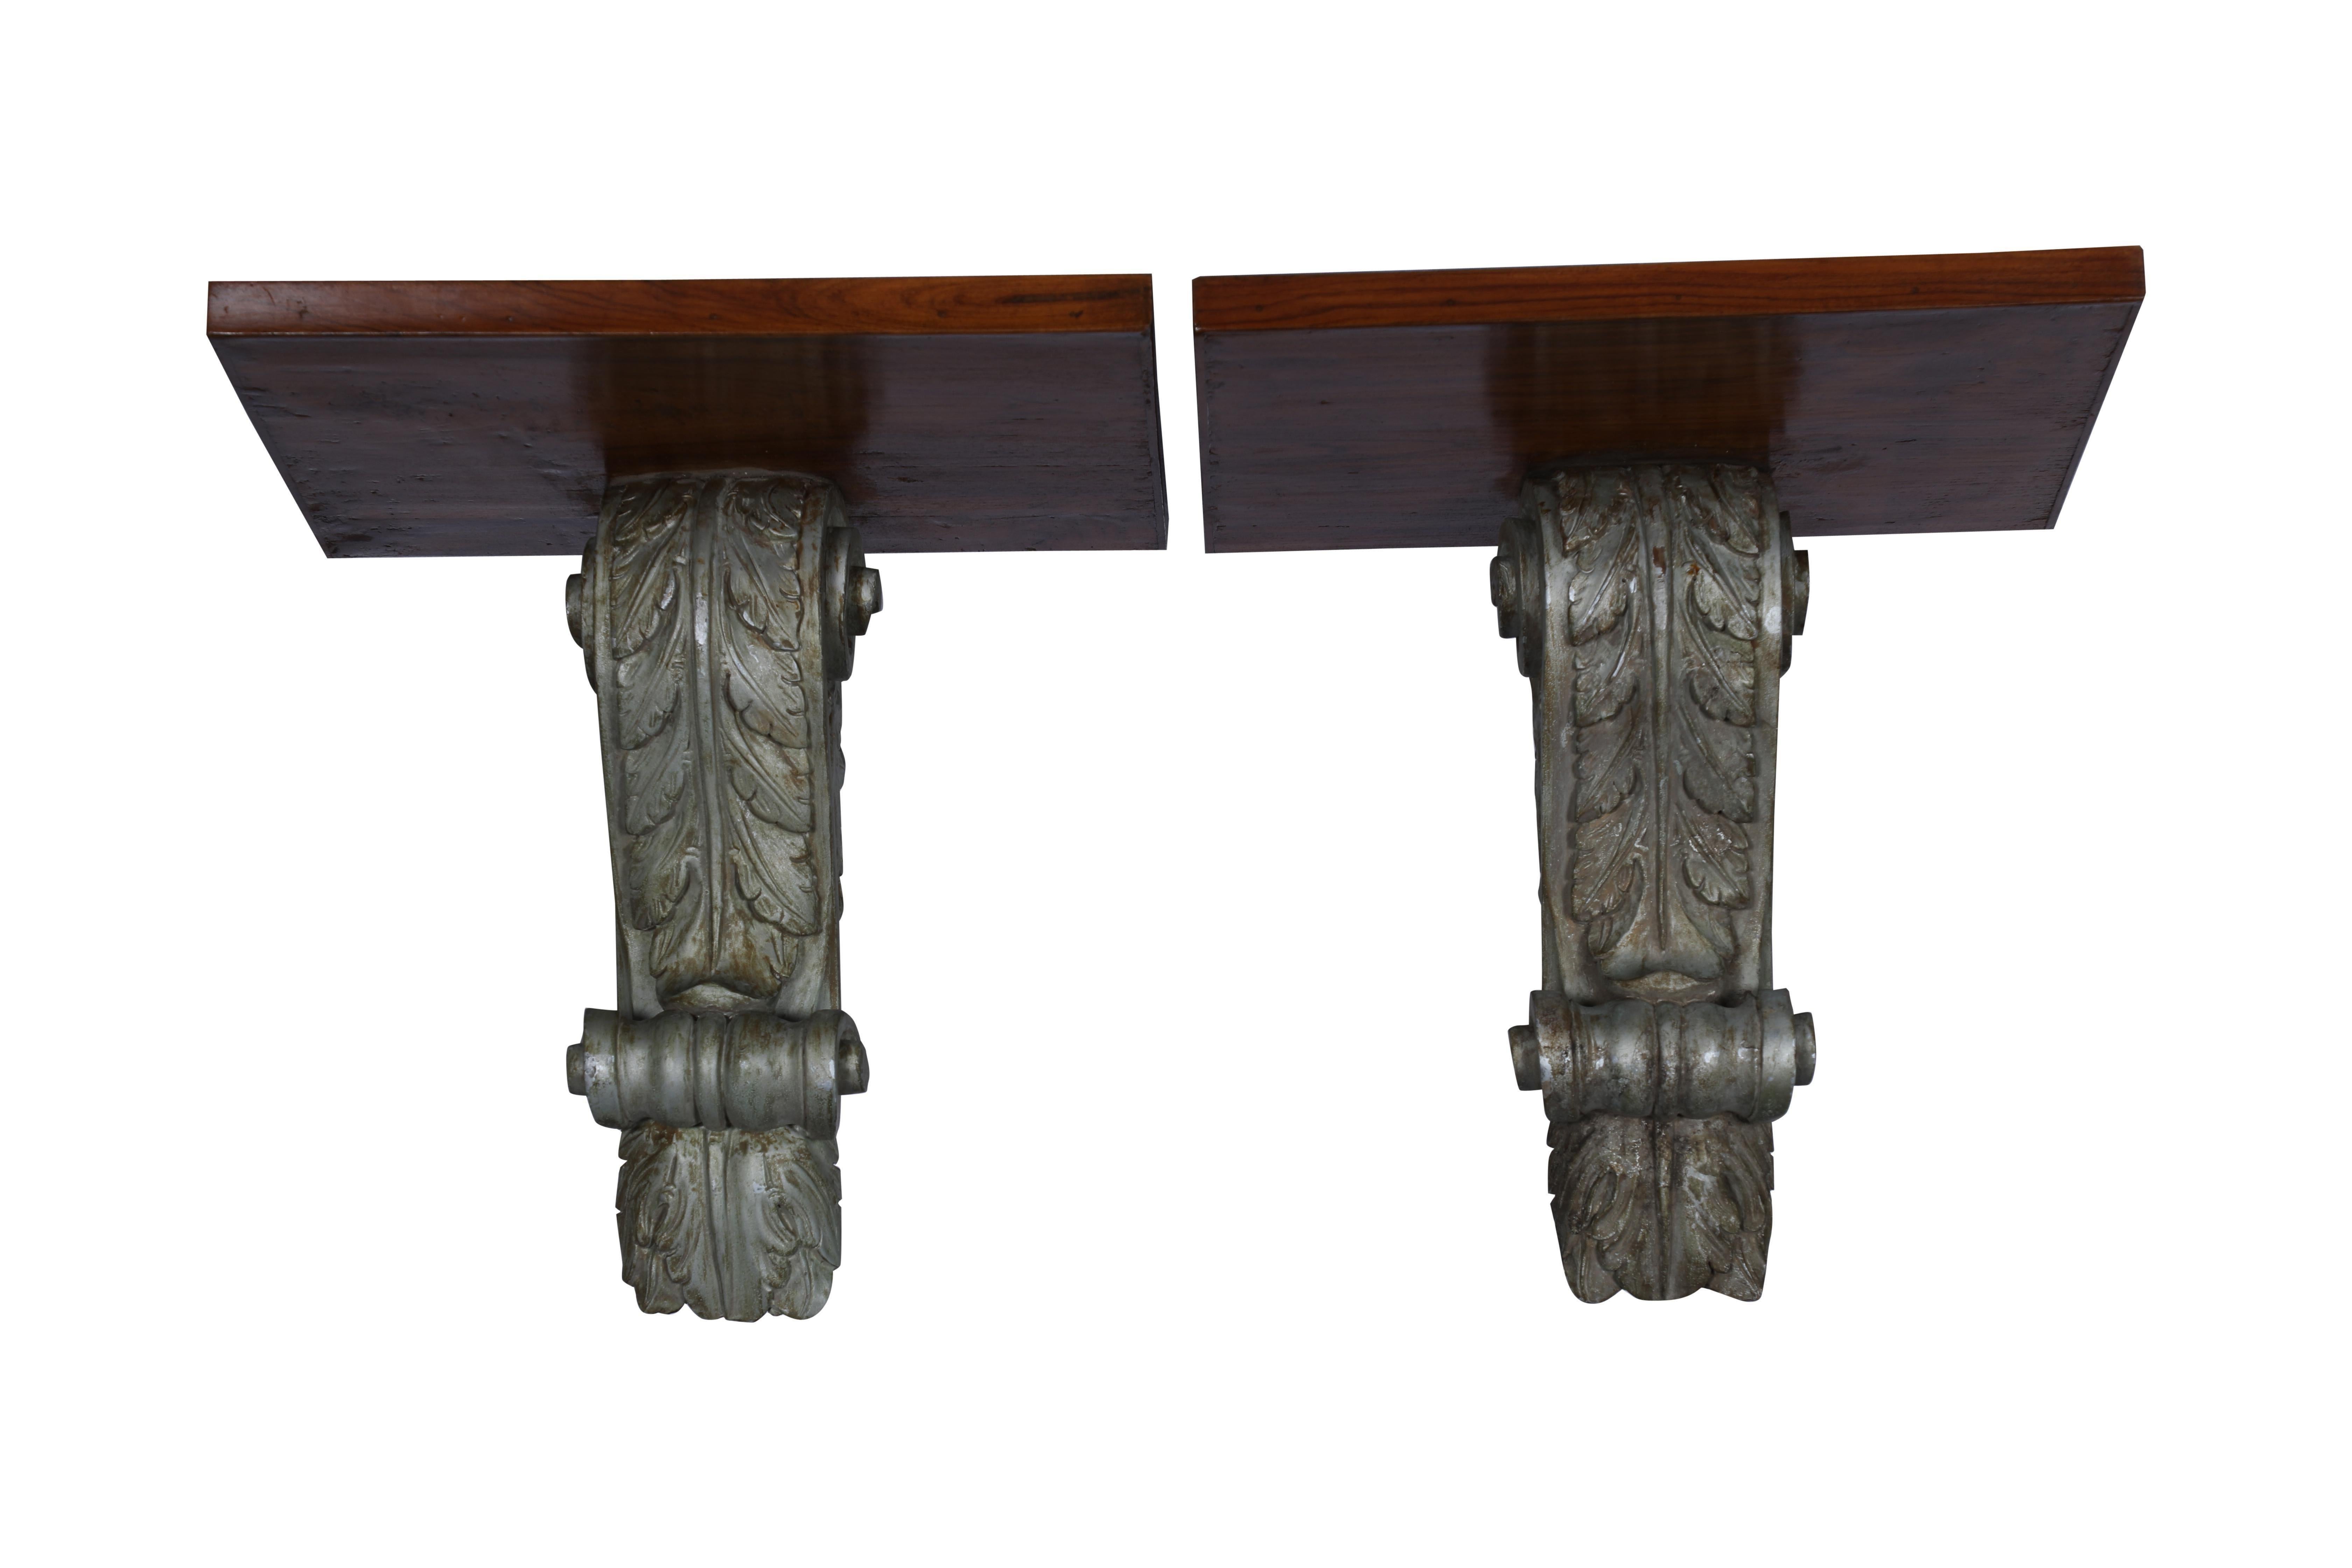 British Colonial Carved Teak Wall Bracket Shelves with Original Paint